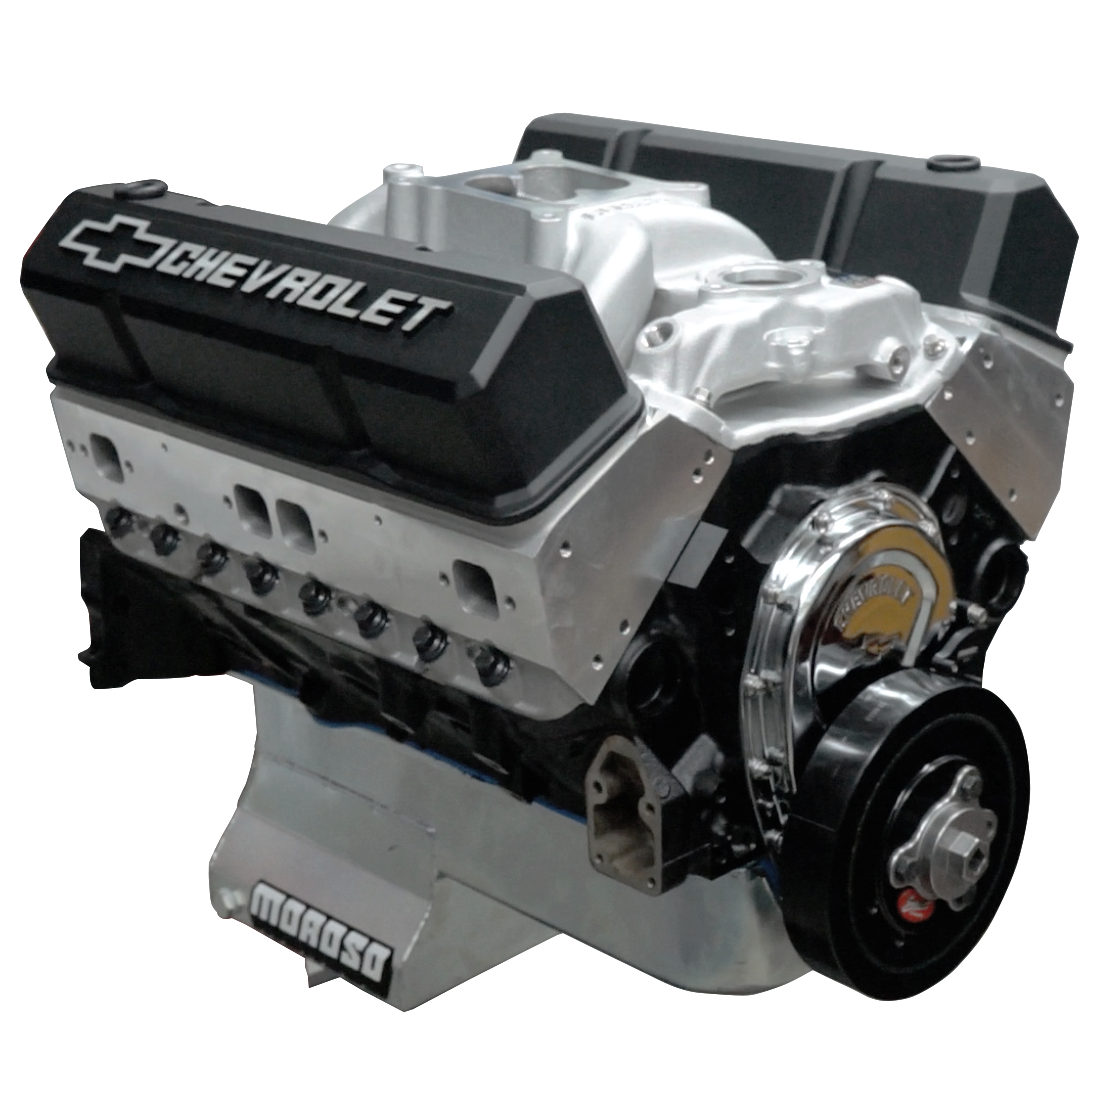 PROWORX SMALL BLOCK CHEVY 427 STROKER STAGE 2 COMPLETE ENGINE ASSEMBLY